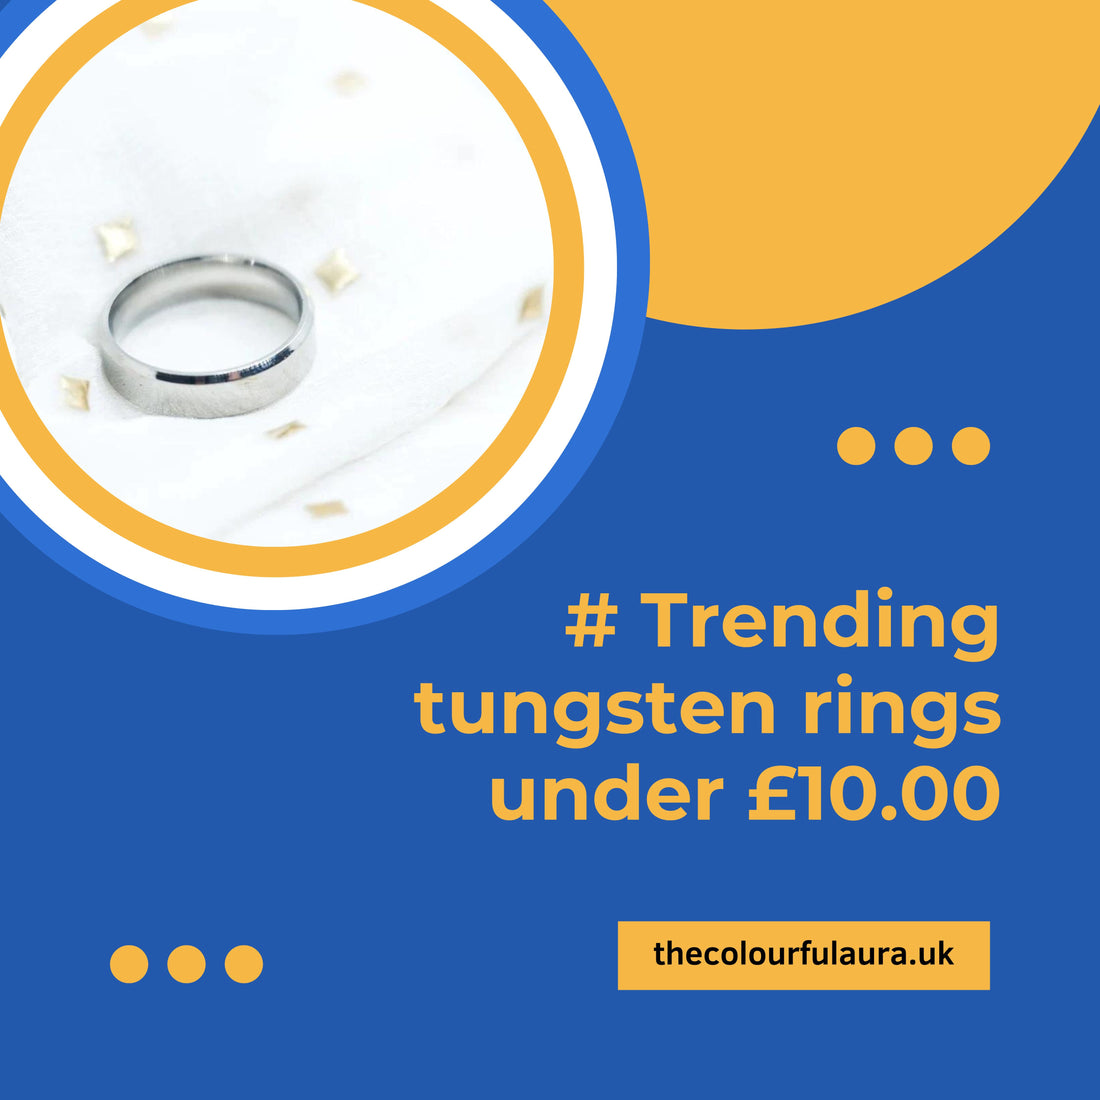 #1 Trending tungsten rings under £10.00 to £20.00